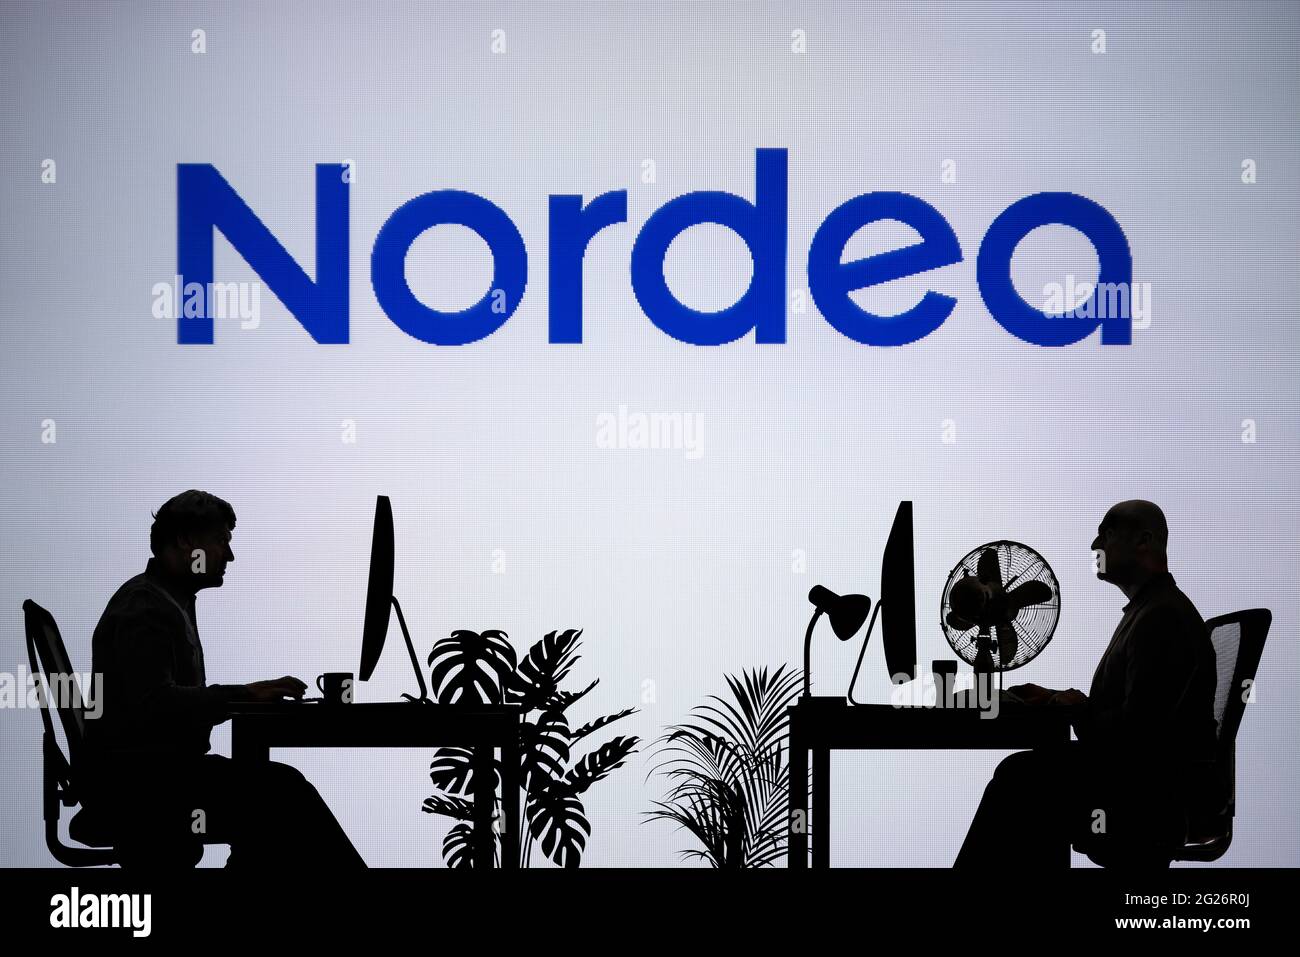 The Nordea logo is seen on an LED screen in the background while two silhouetted people work in an office environment (Editorial use only) Stock Photo